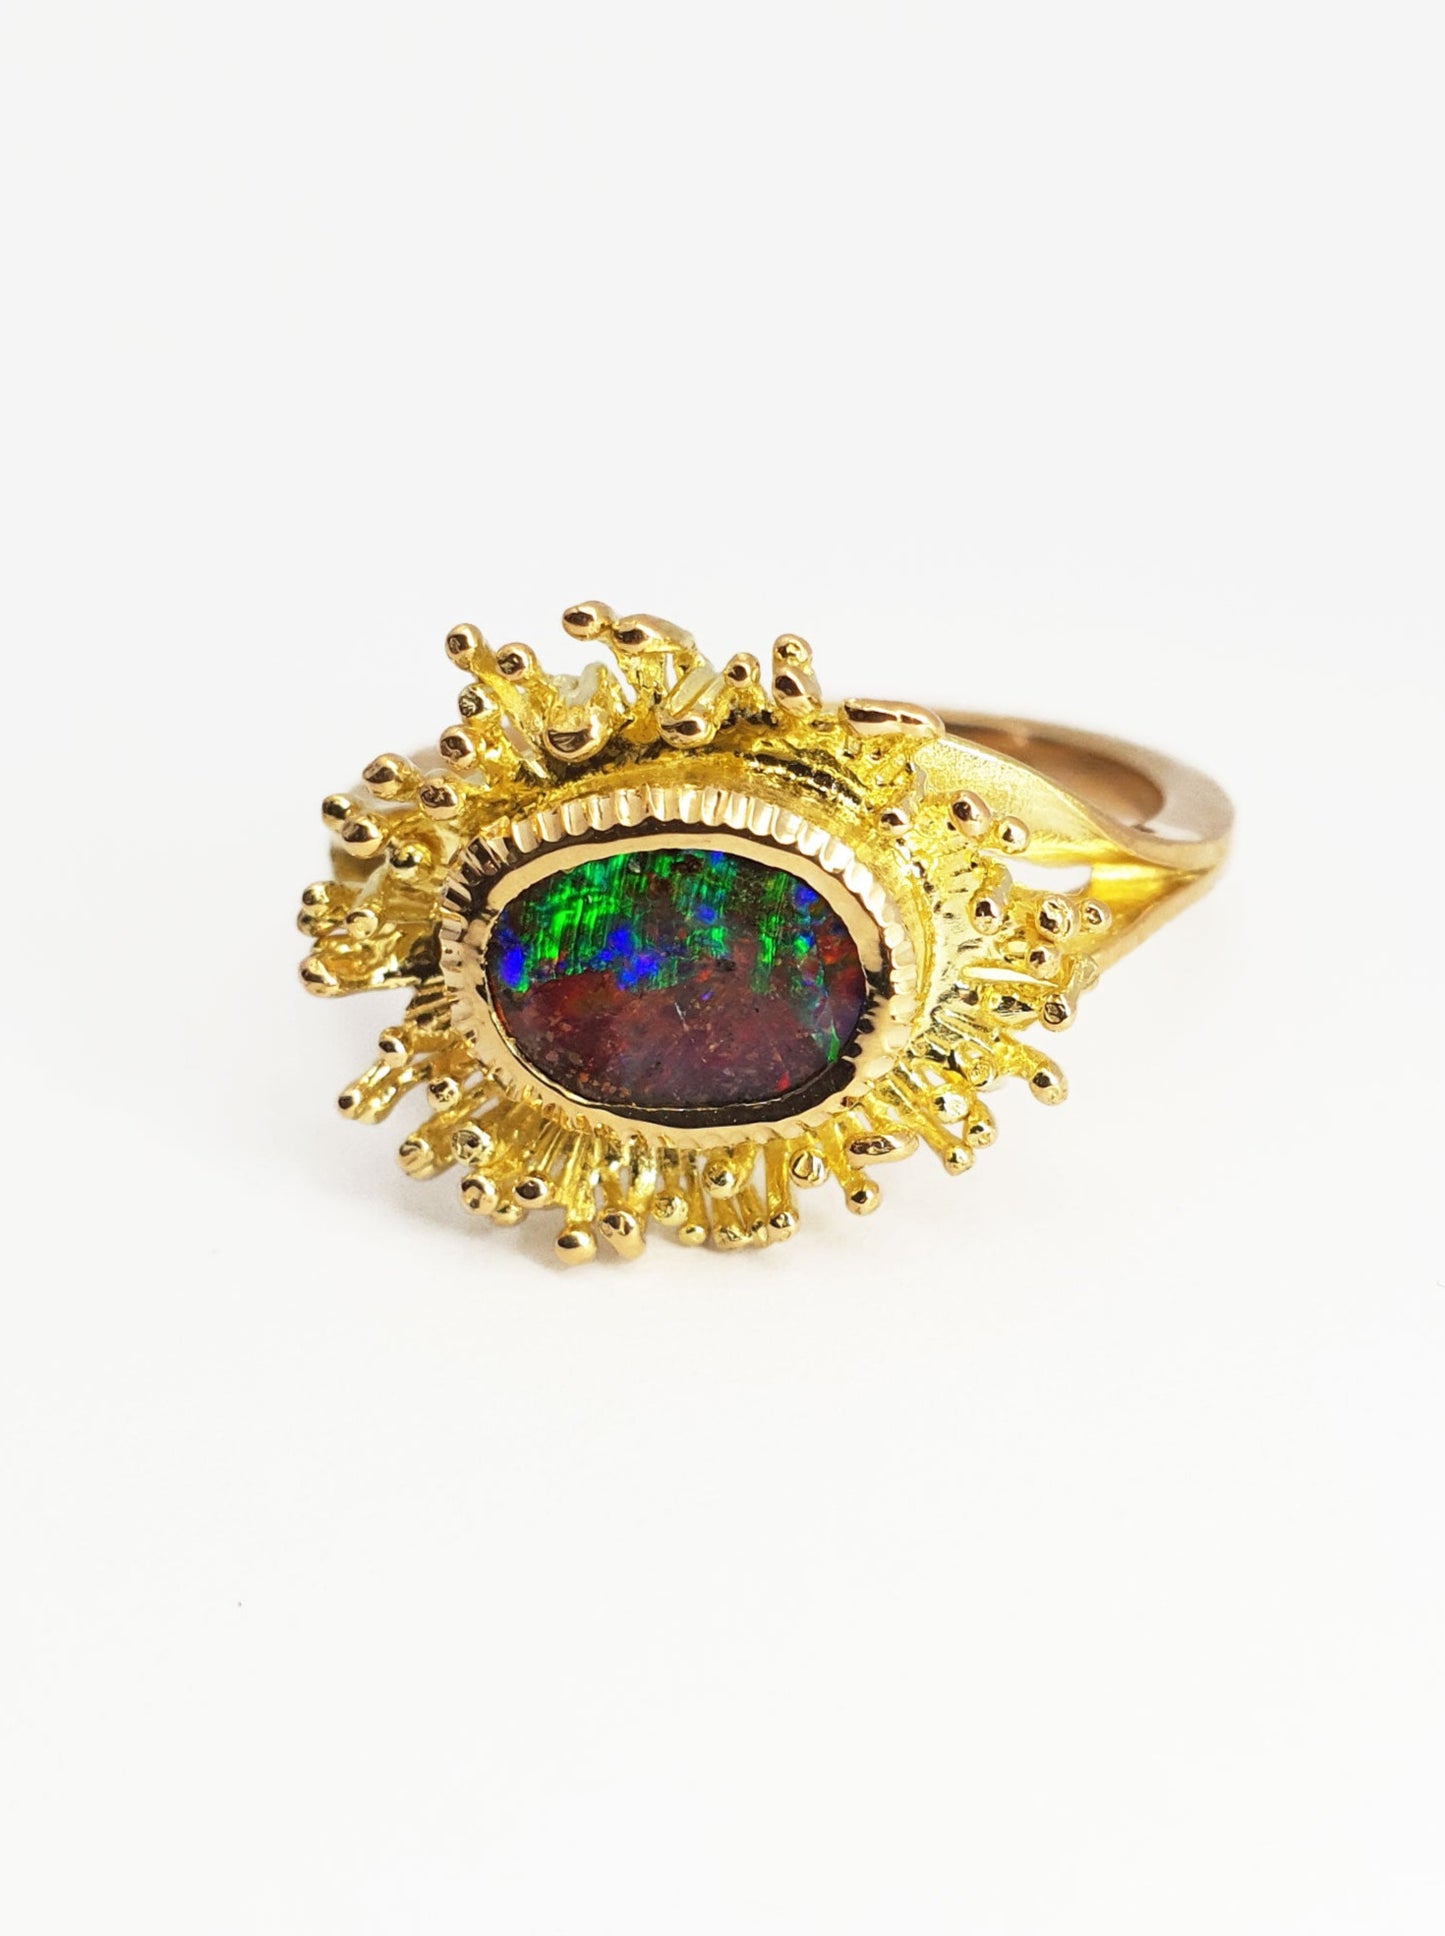 Gold fringe ring with Queensland Boulder Opal. This opal resembles the aurora with greens, reds, blues and purples. Our products are all made with ethically sourced materials and handcrafted in our Brisbane based studio. Australian made and designed for high quality fine fashion